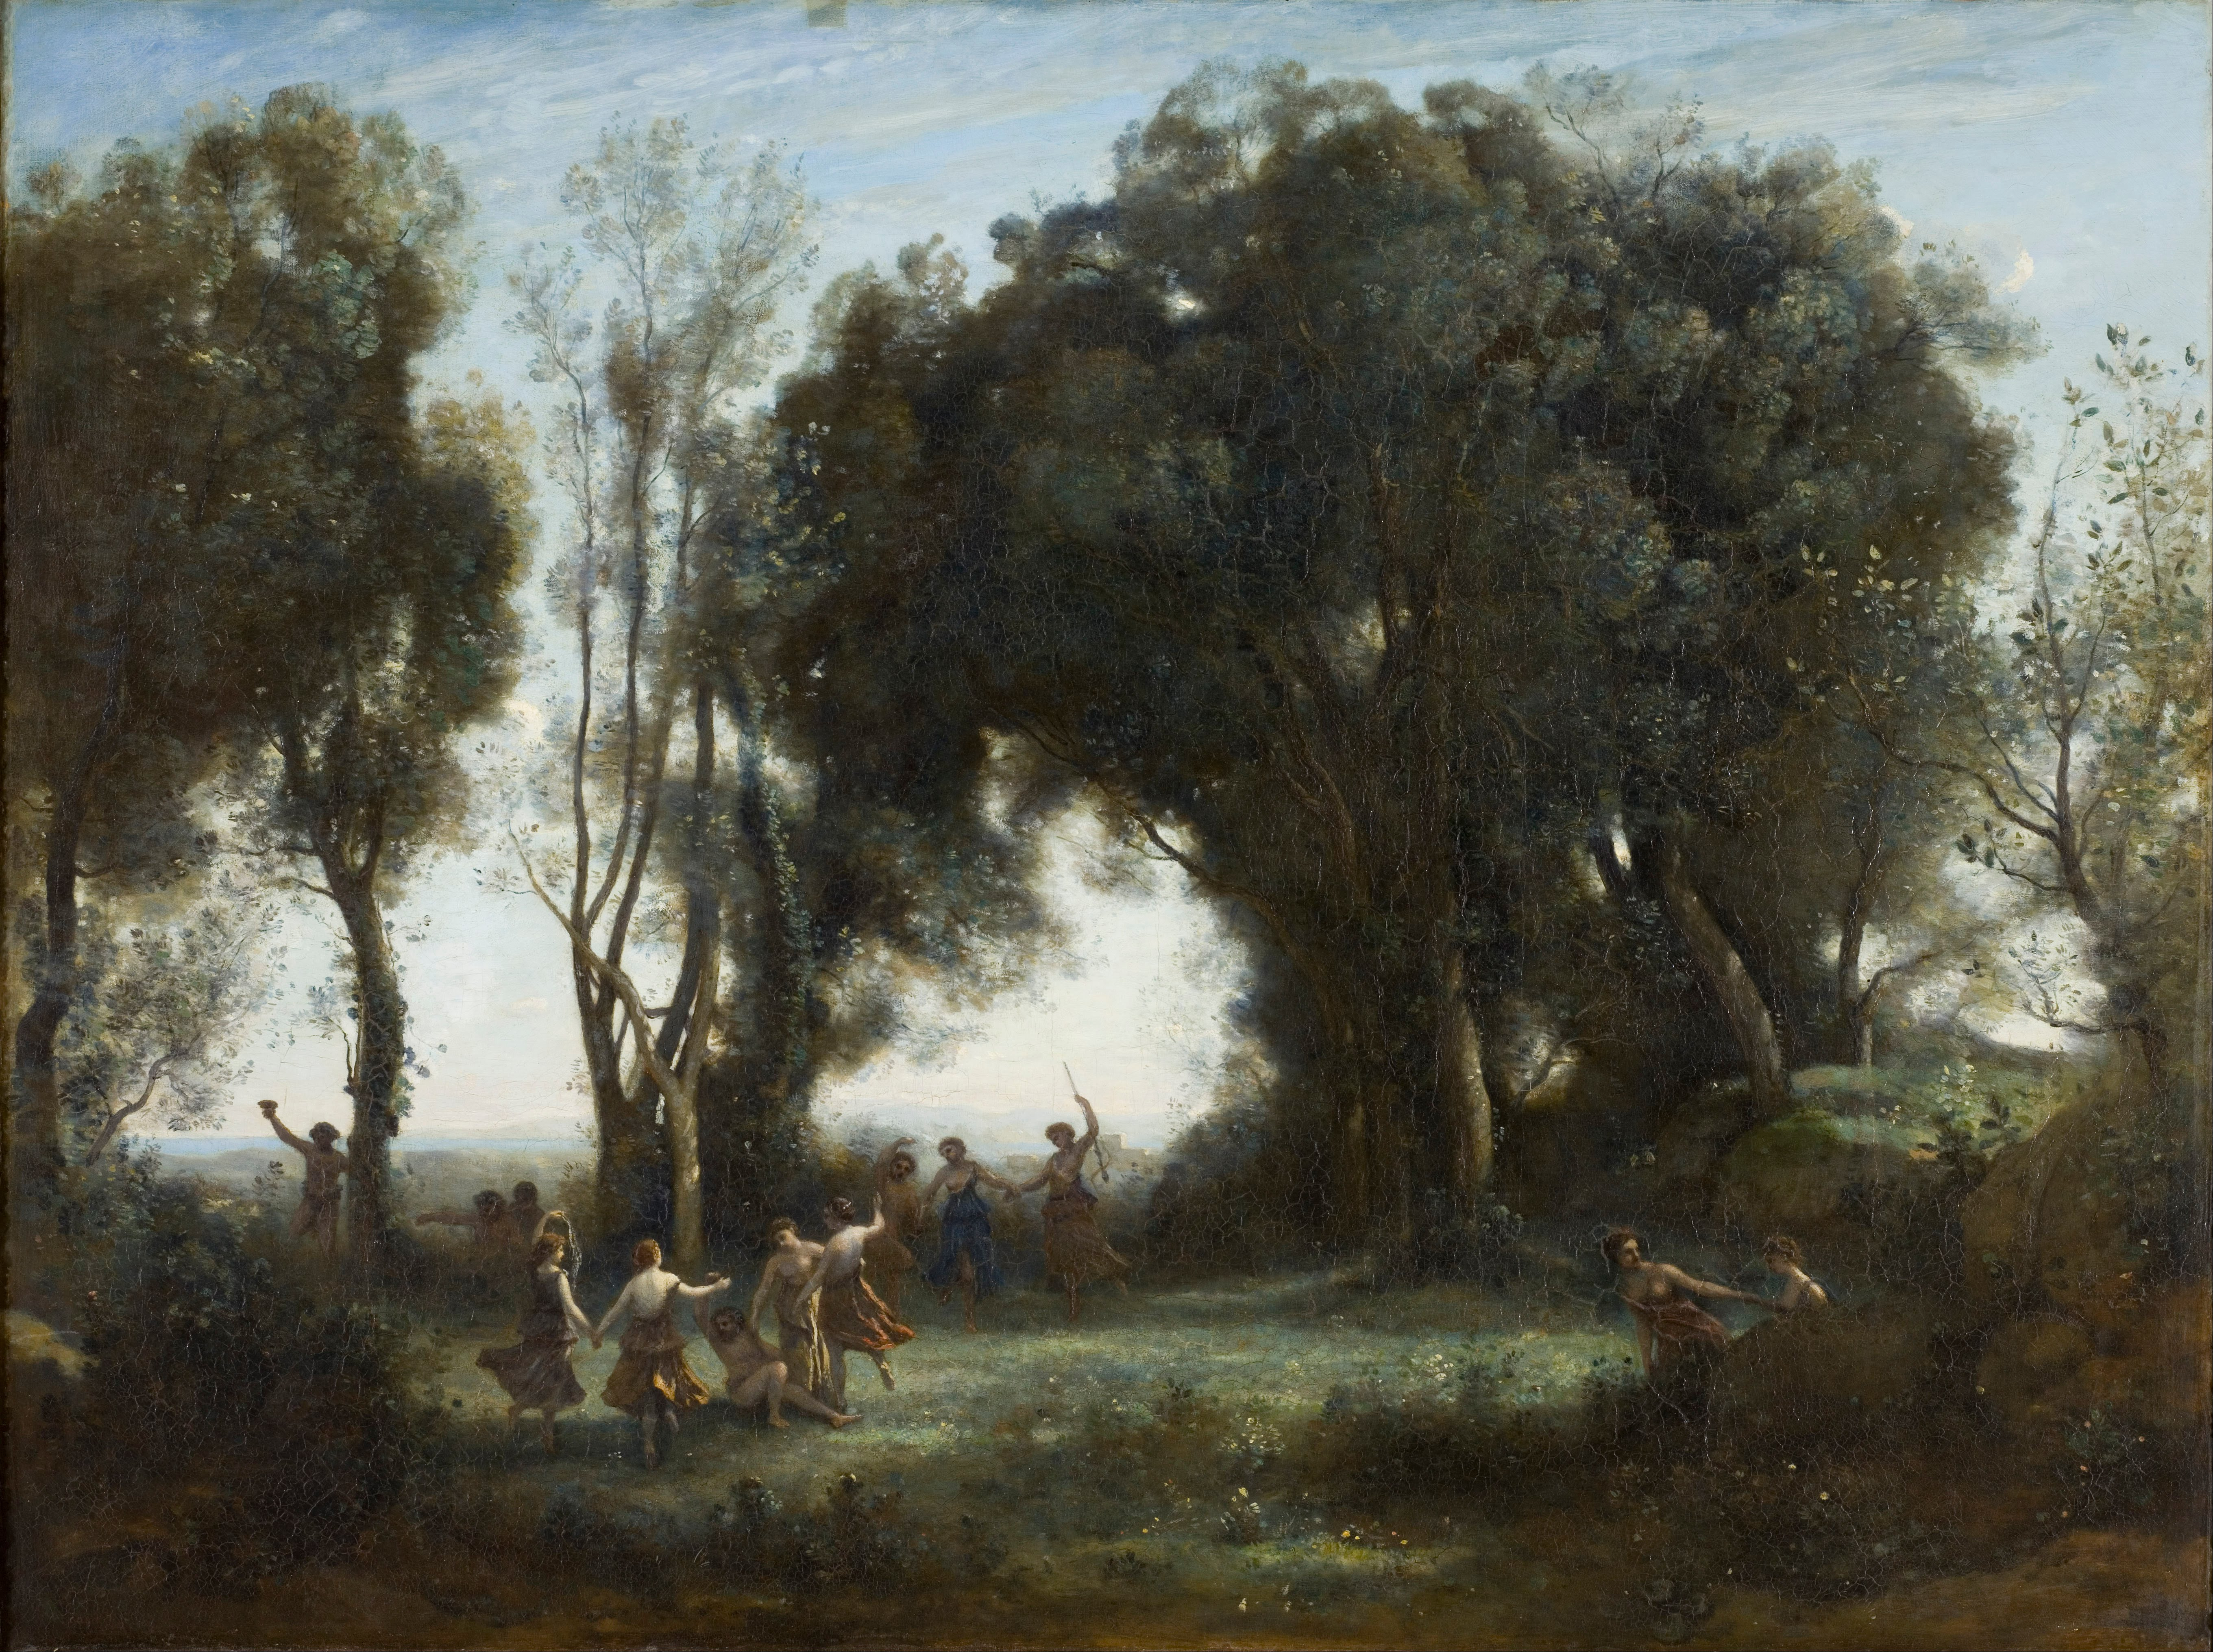 0393_Jean-Baptiste-Camille Corot_The Dance of the Nymphs 썸네일